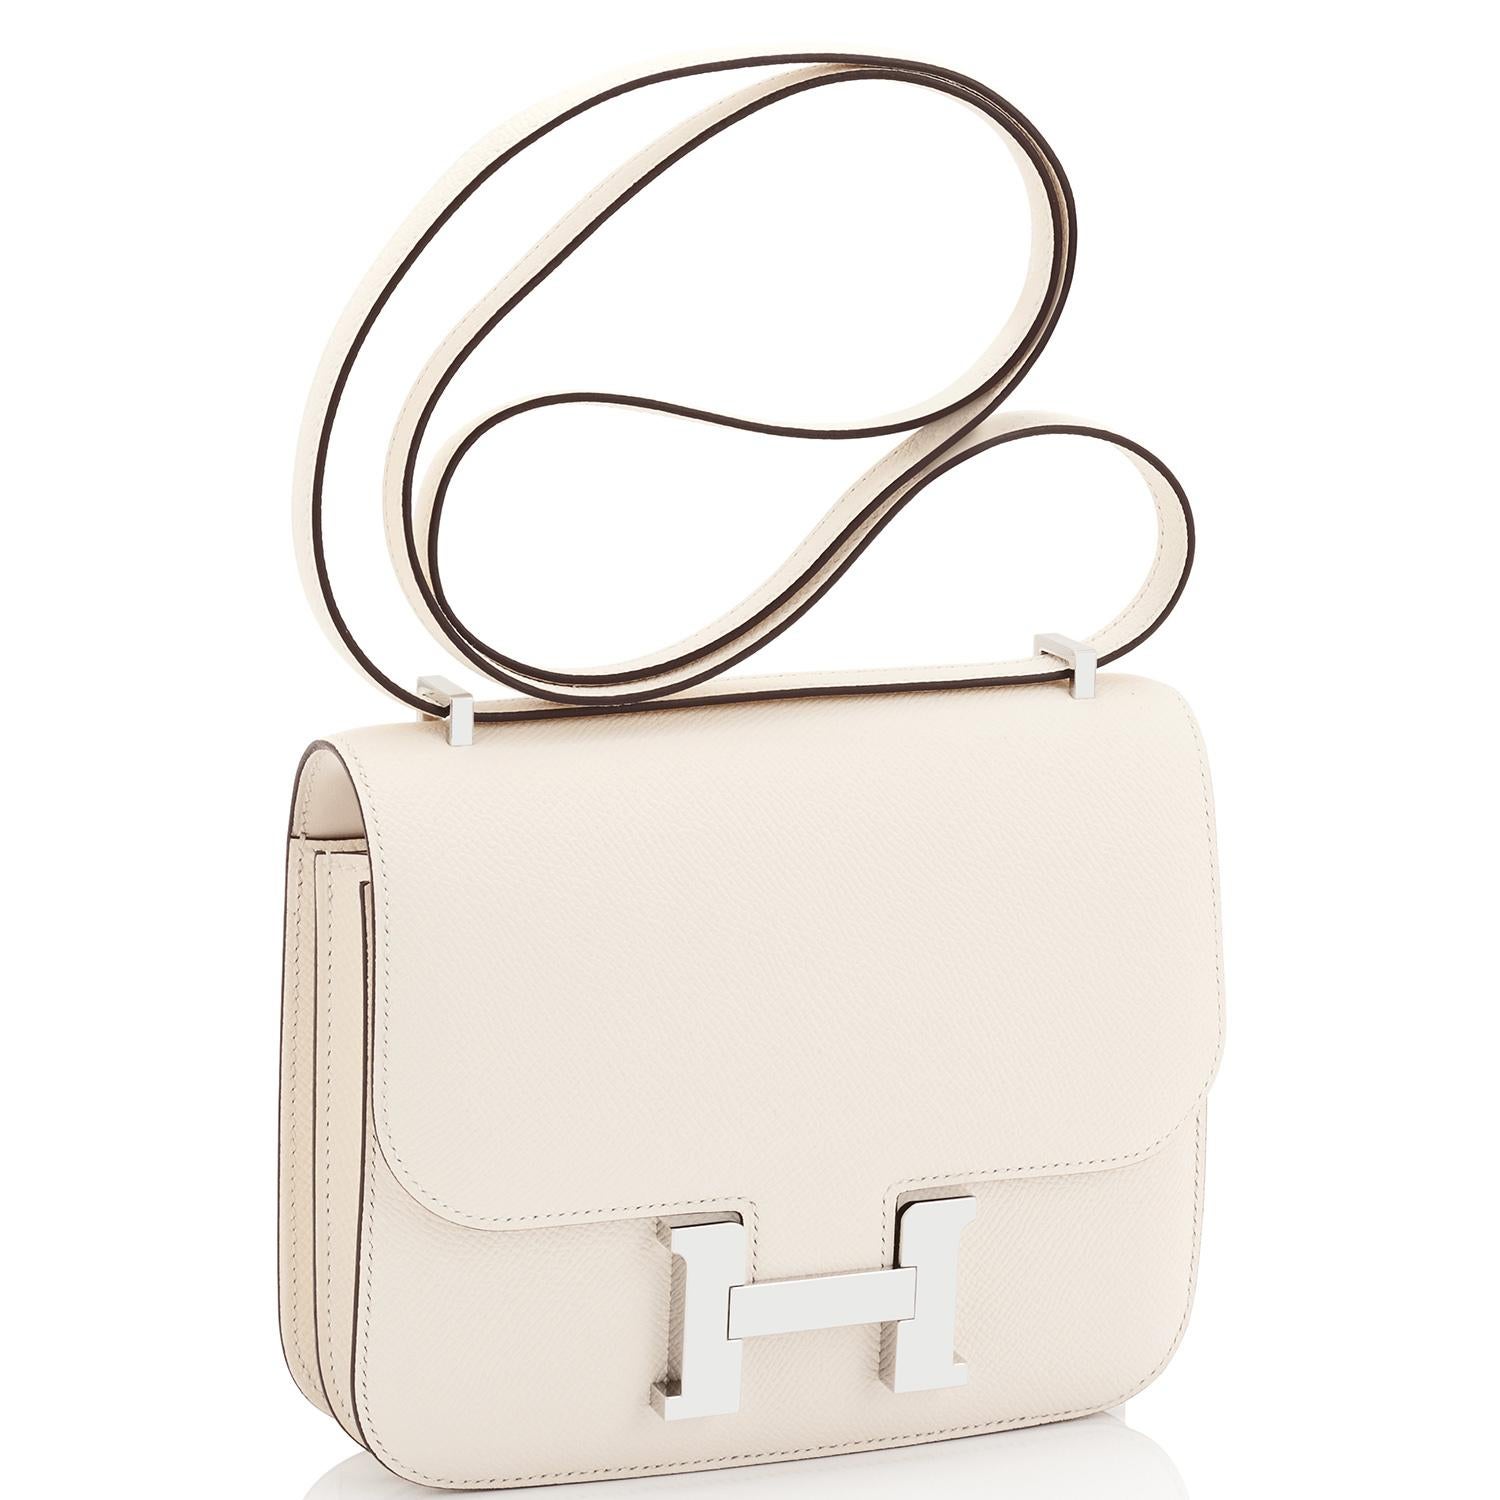 Hermes Nata Off White Epsom Constance 18cm Craie Shoulder Bag Y Stamp, 2020
Just purchased from Hermes store; bag bears new 2020 interior Y stamp.
Perfect Gift! Brand New in Box. Store Fresh in Pristine Condition (with plastic on hardware).
Nata